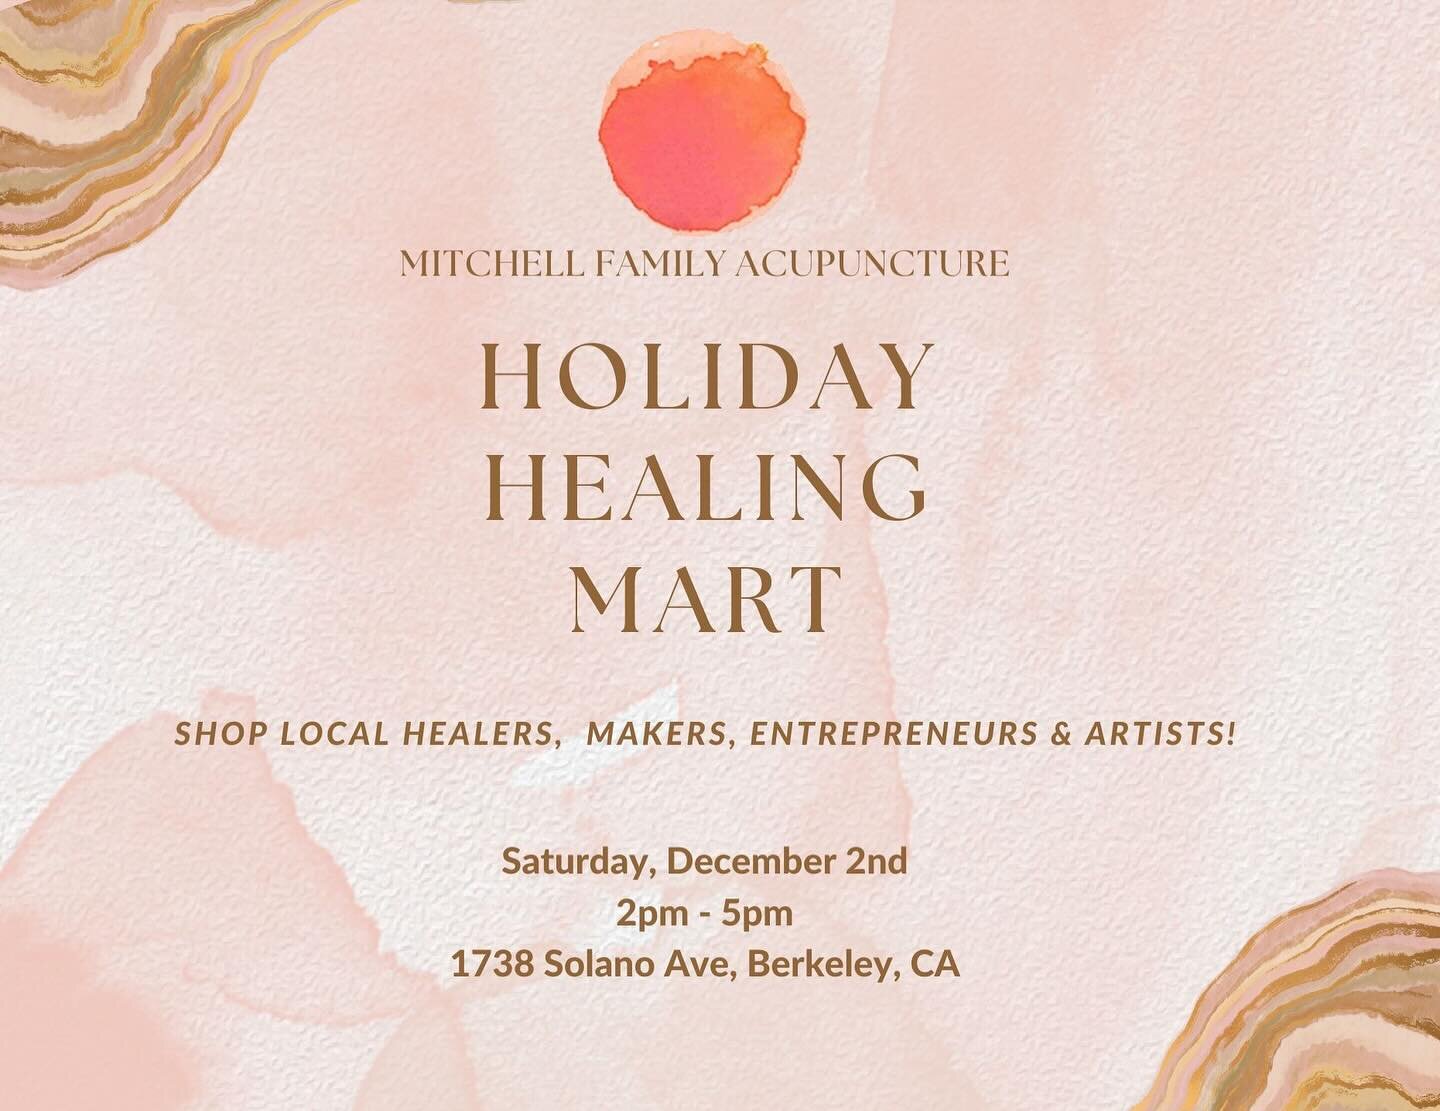 HOLIDAY HEALING MART at Mitchell Family Acupuncture @berkeleyacupuncture - Join us on Saturday December 2nd from 2-5pm. Shop and experience local healers, makers, entrepreneurs and artists, eat delicious Hawaiian inspired bites @allpauberkeley and so